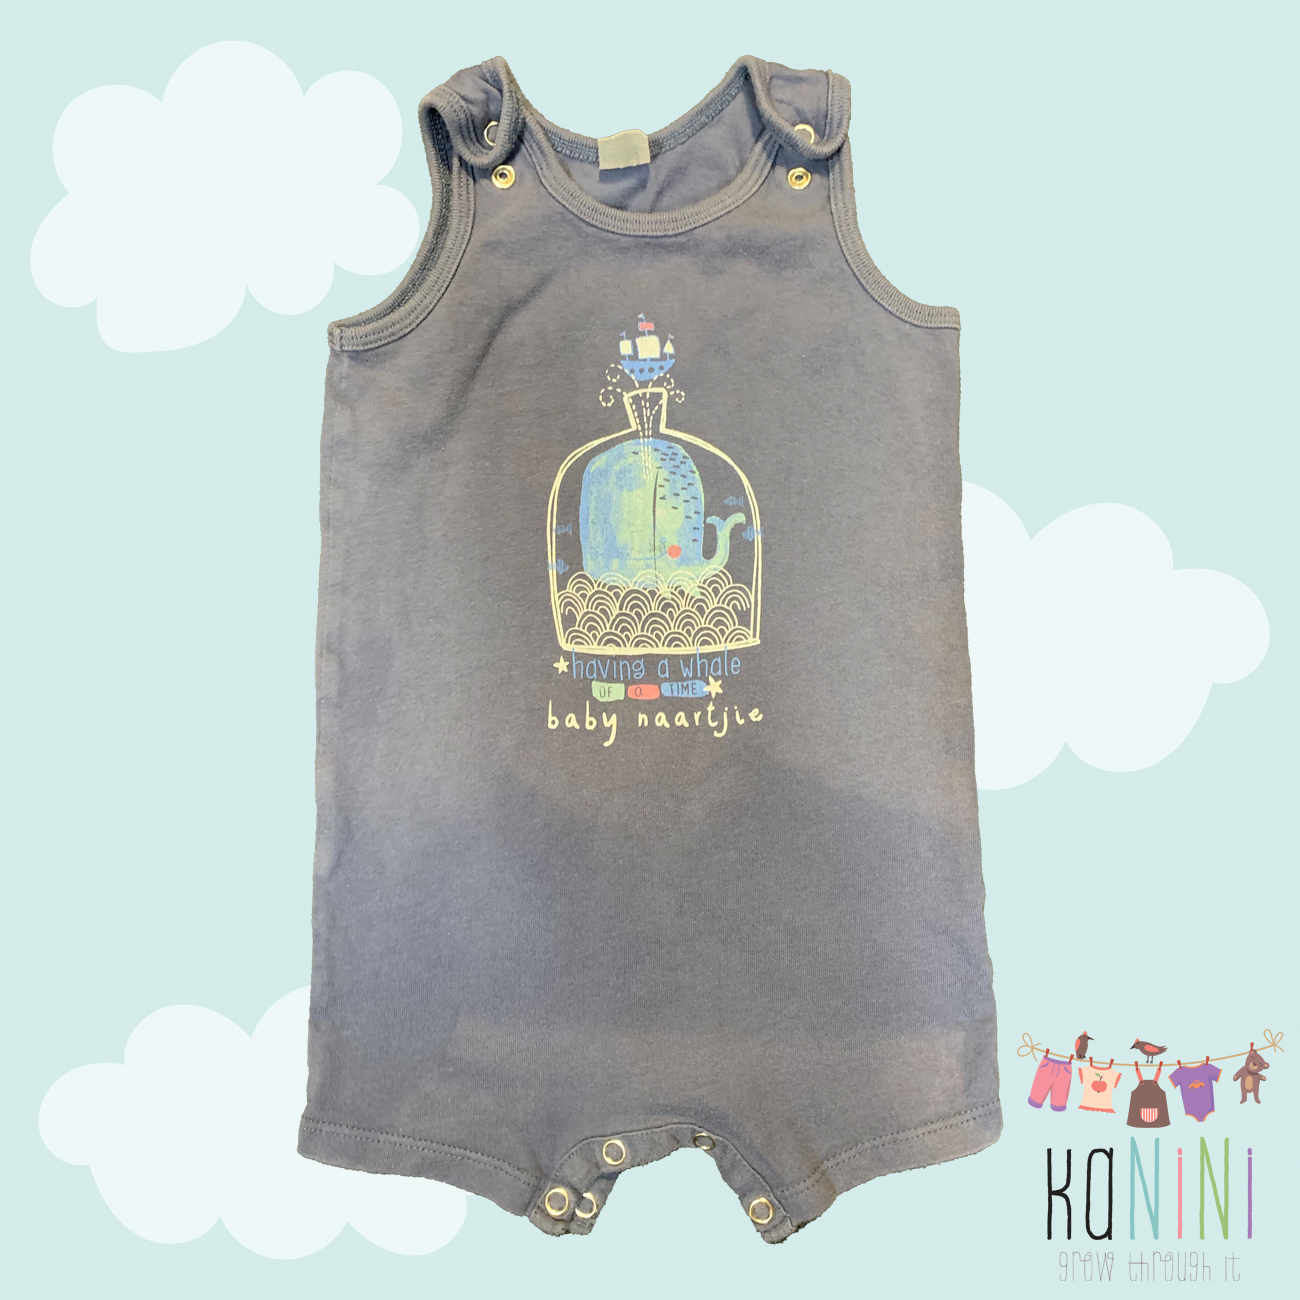 Featured image for “Naartjie 6-12 Months Boys Romper”